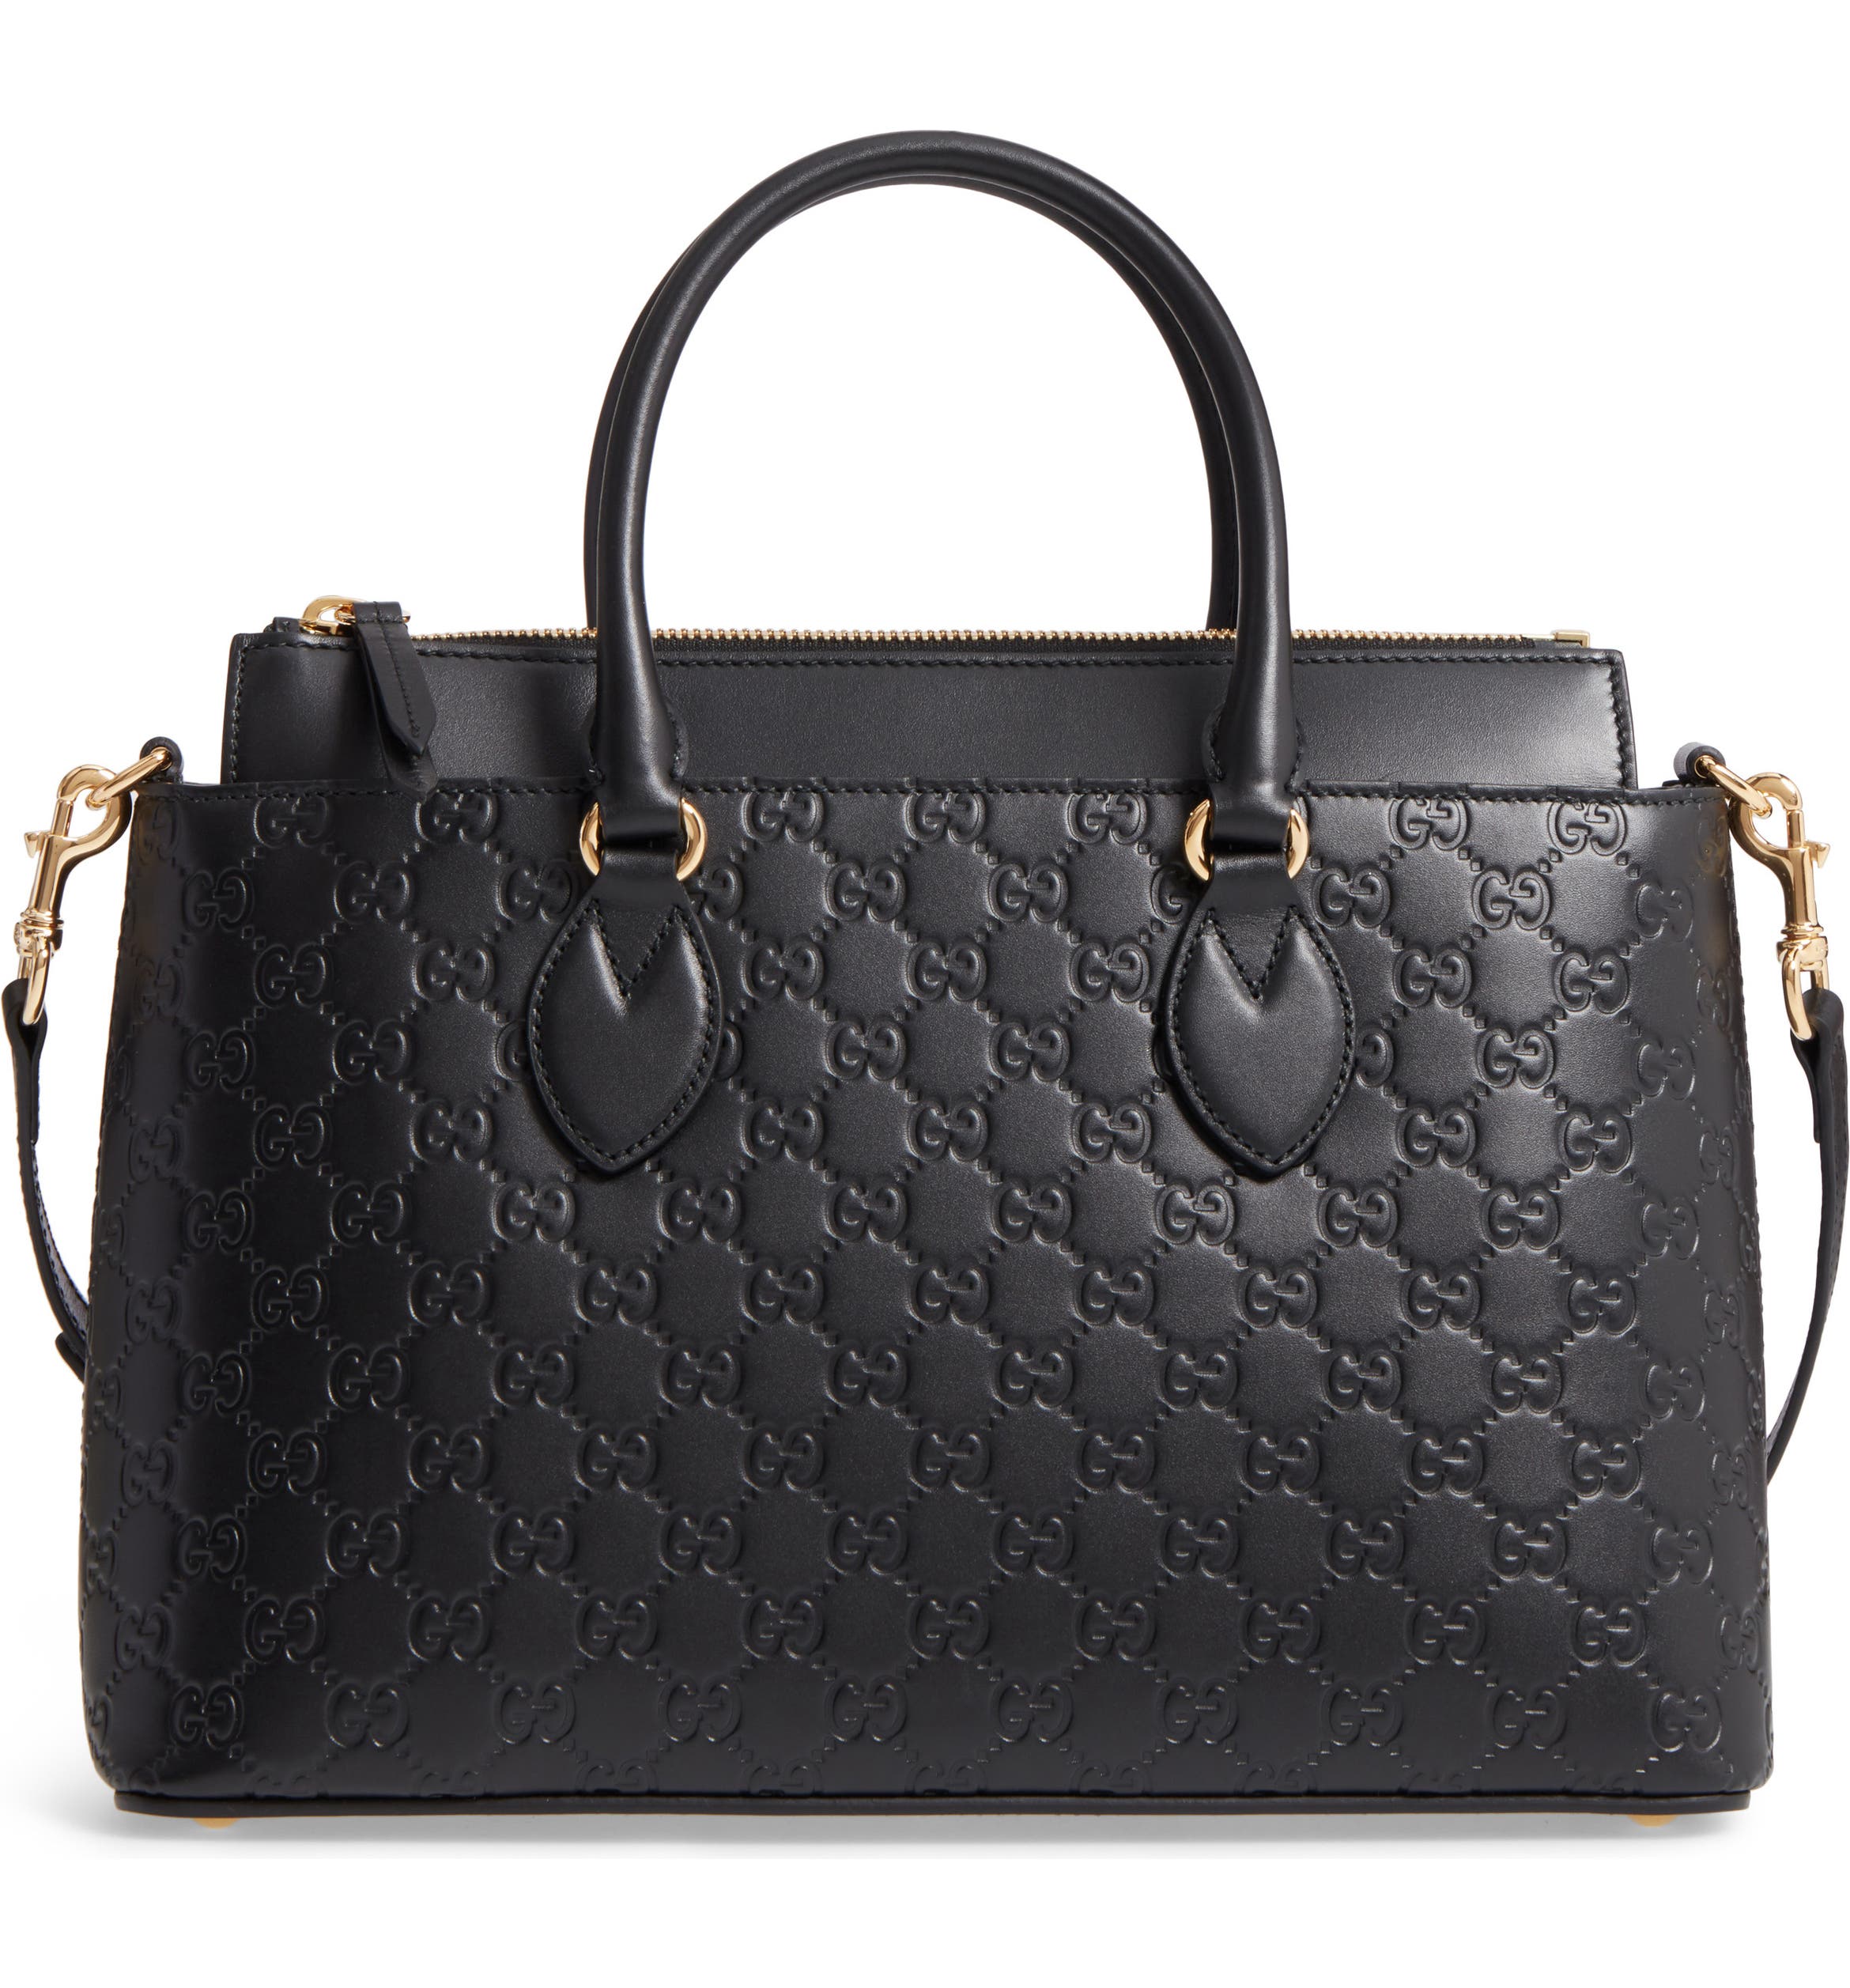 Gucci Small Top Handle Signature Leather Satchel | Nordstrom